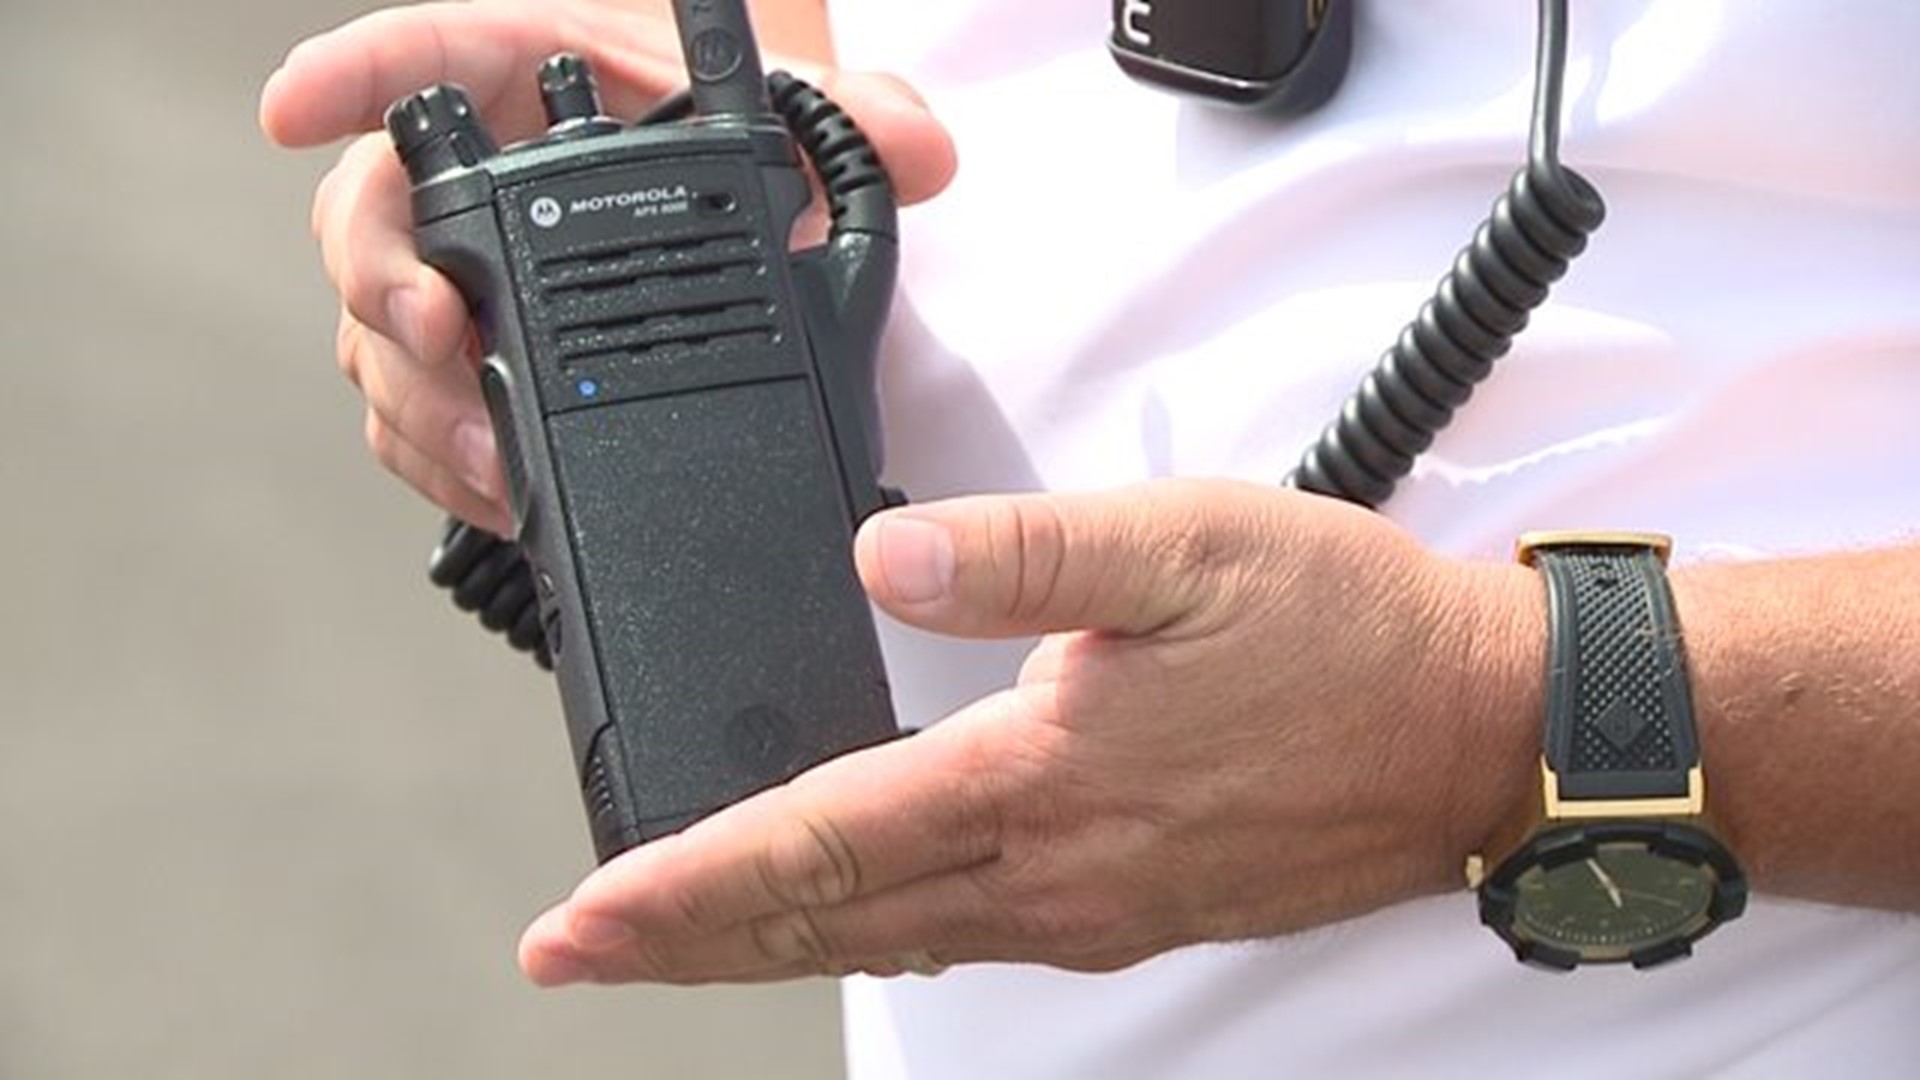 Muscatine County working to get new emergency radios to work within Wilton school walls